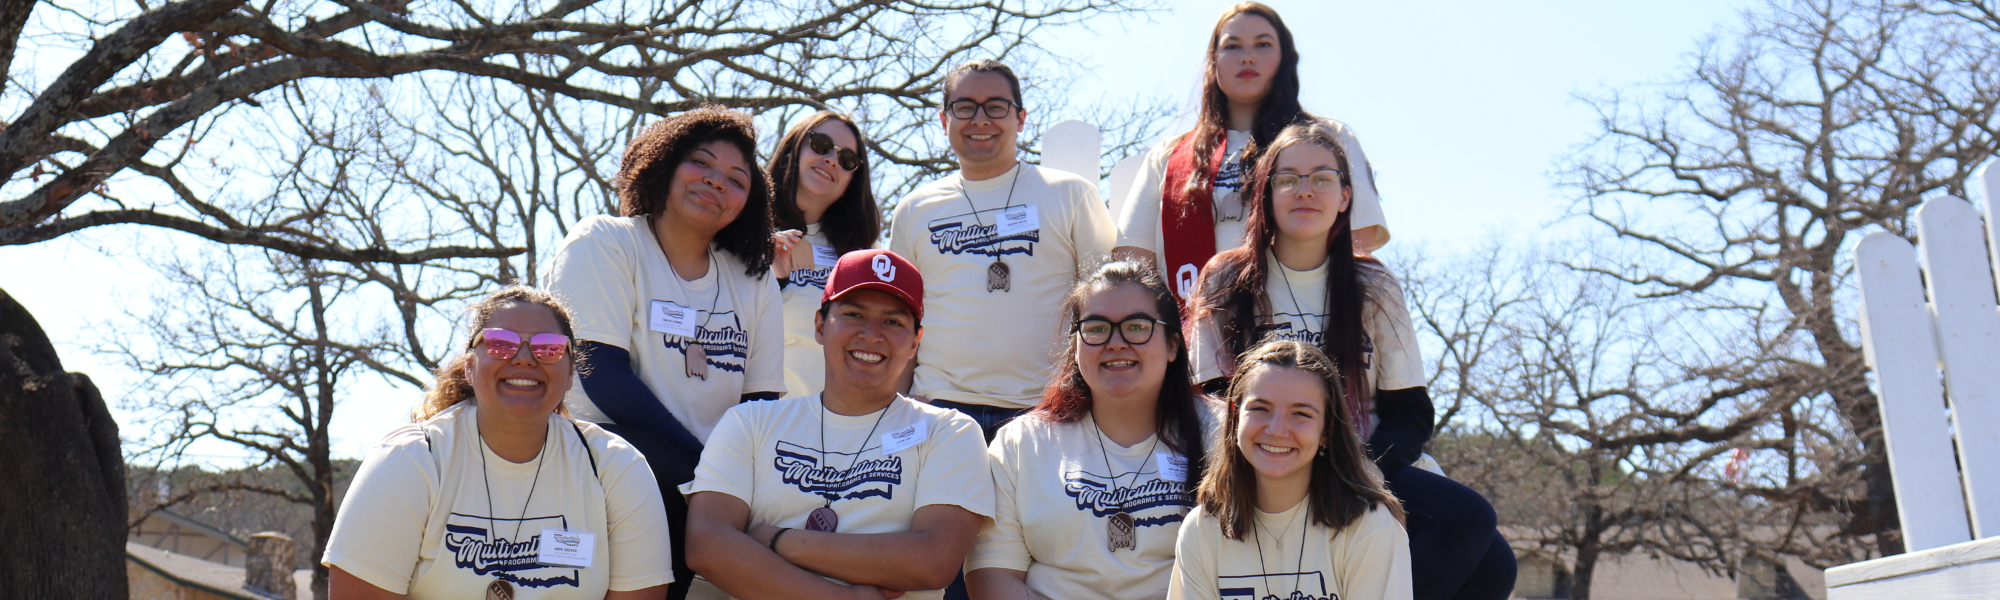 The American Indian Student Association executive committee at a retreat.